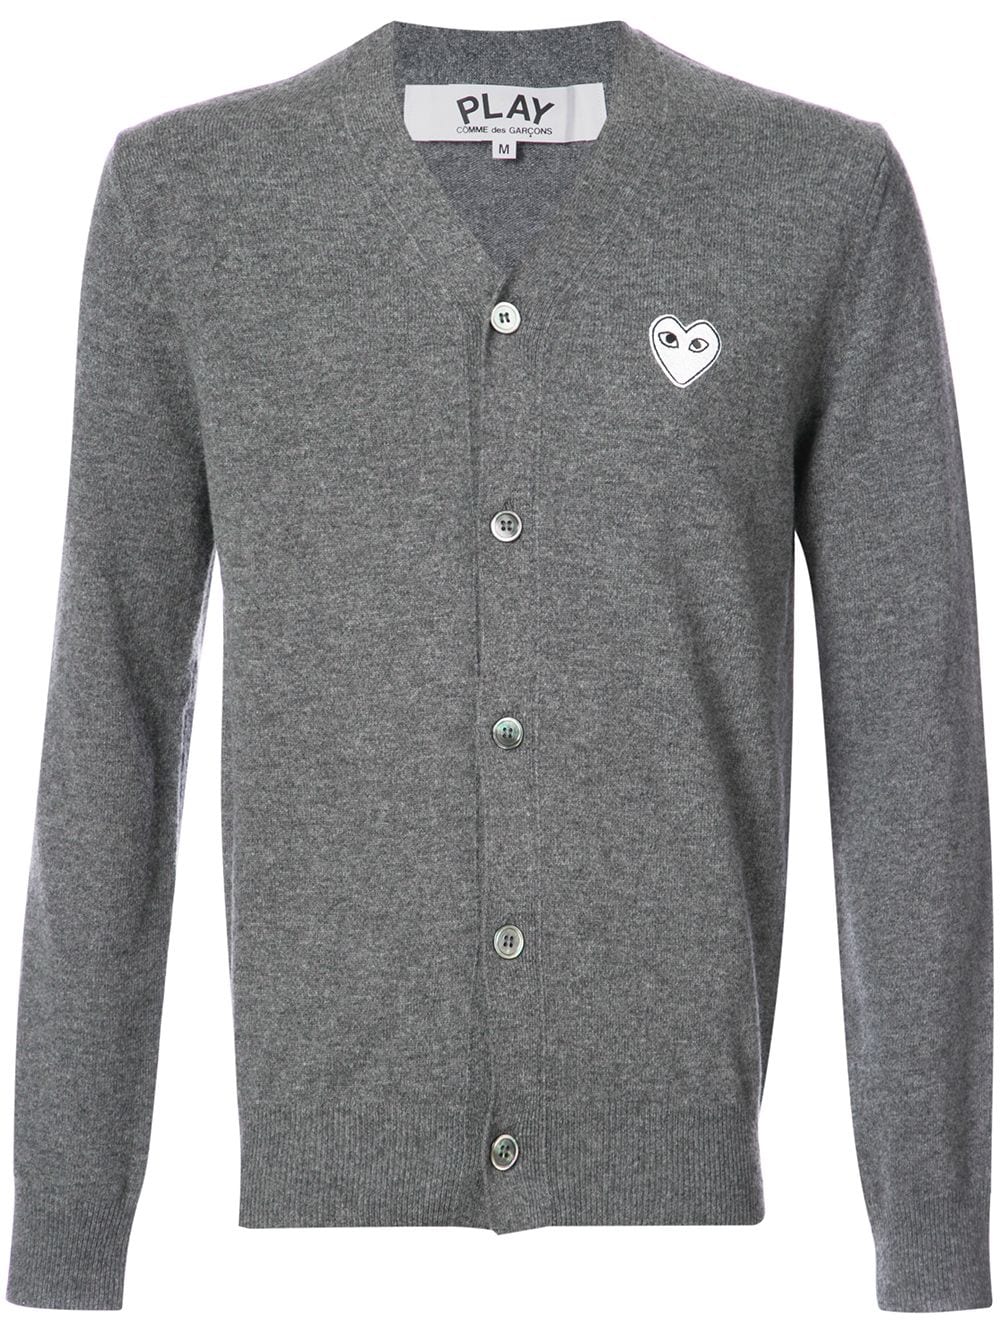 Comme Des Garçons Play cardigan with white heart - Grey von Comme Des Garçons Play